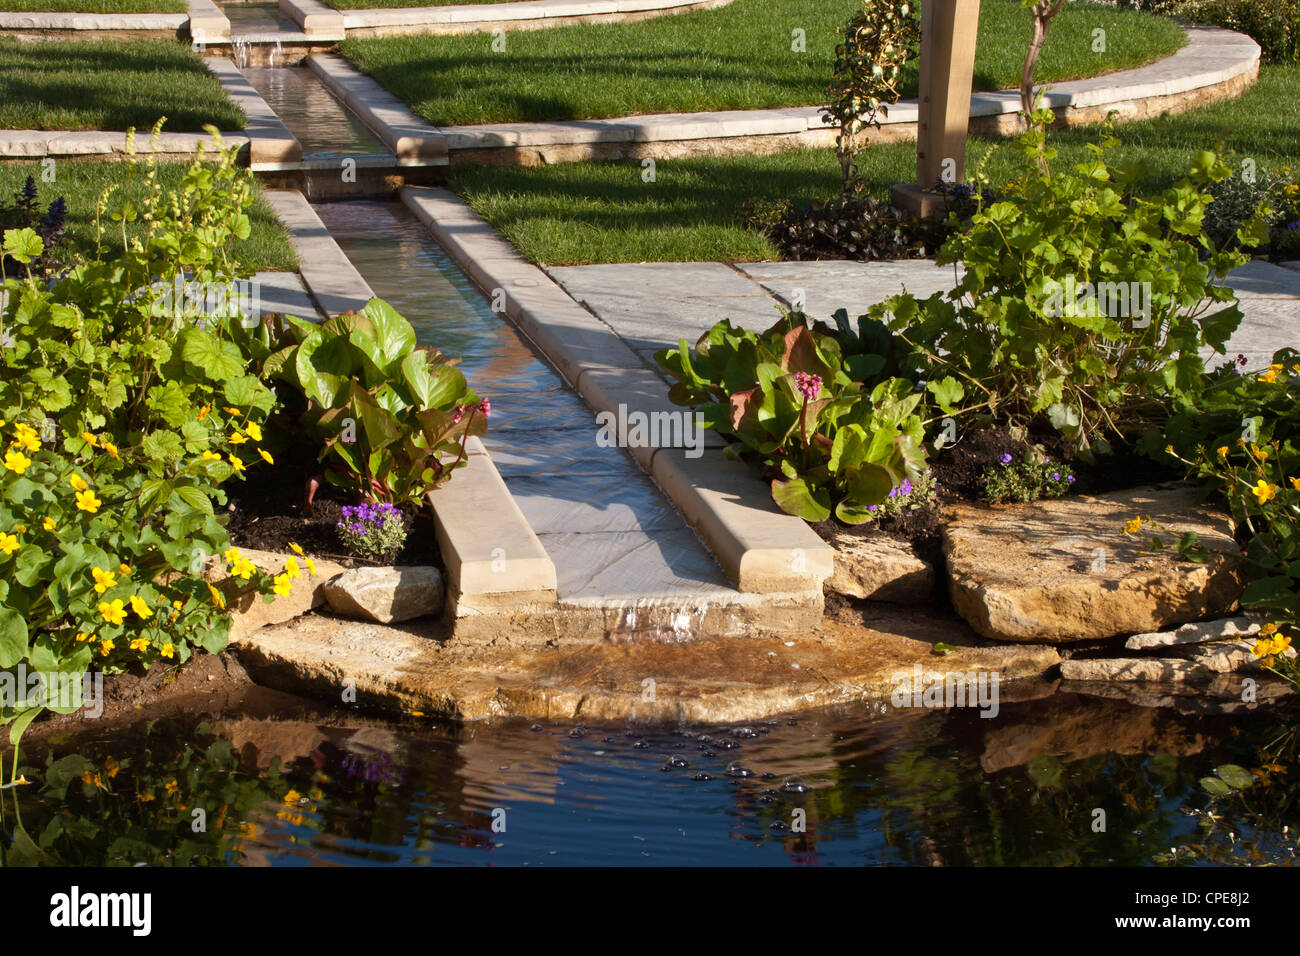 a garden with garden rill water feature made from stone and paved paving borders lawn lawns water marginal plants planting UK Stock Photo